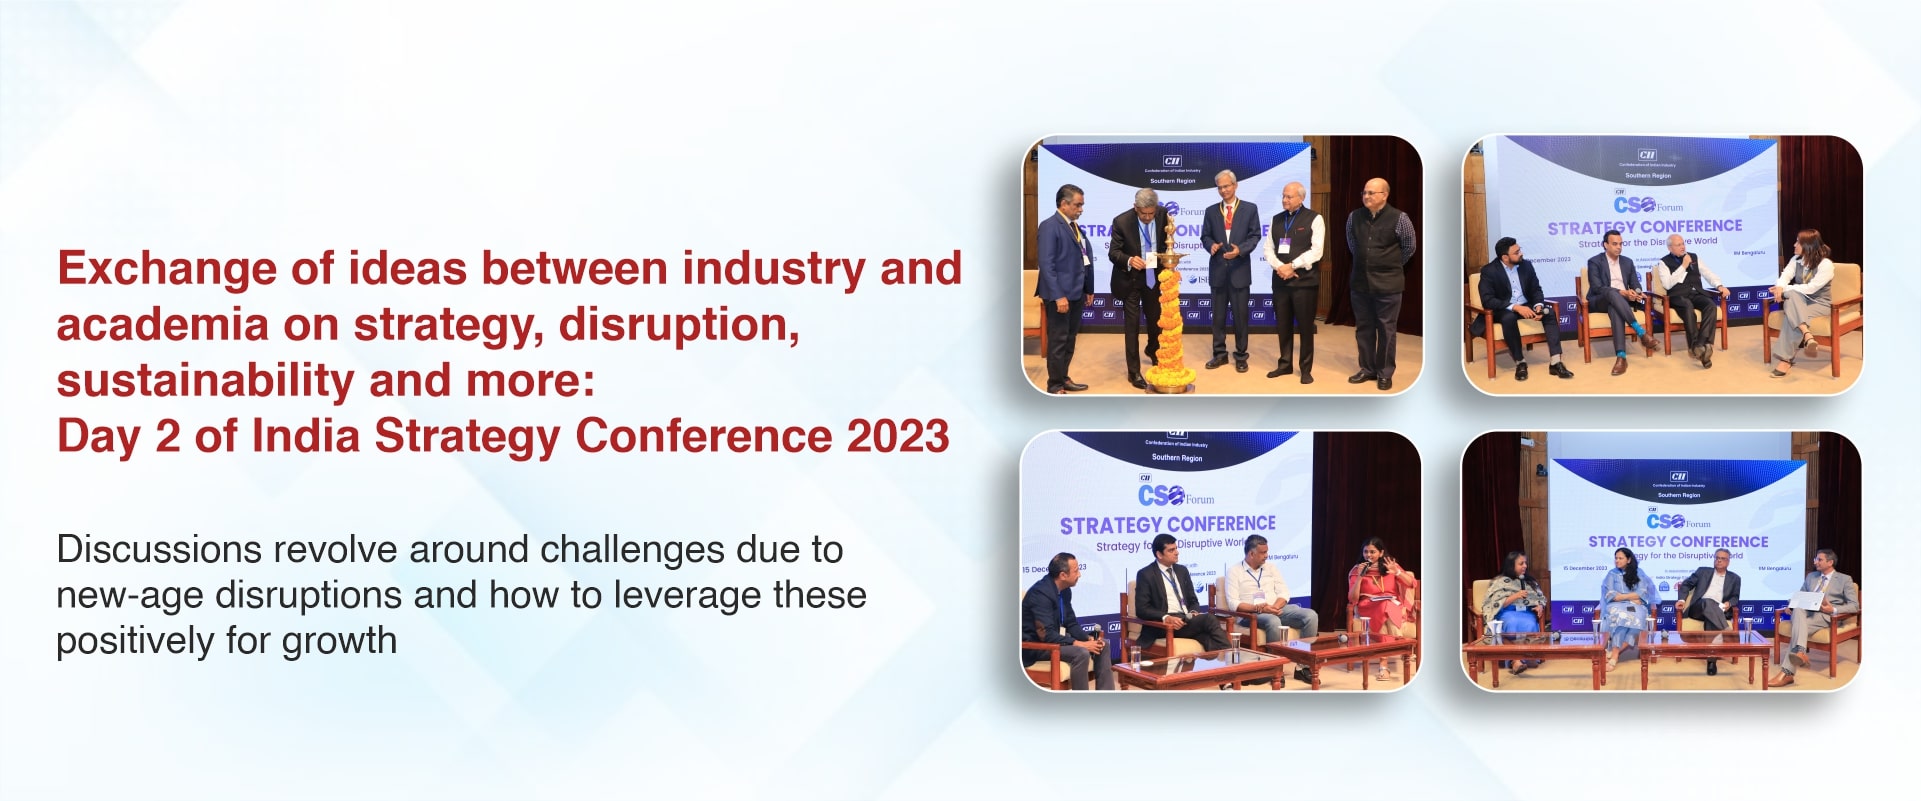 Exchange of ideas between industry and academia on strategy, disruption, sustainability and more: Day 2 of India Strategy Conference 2023